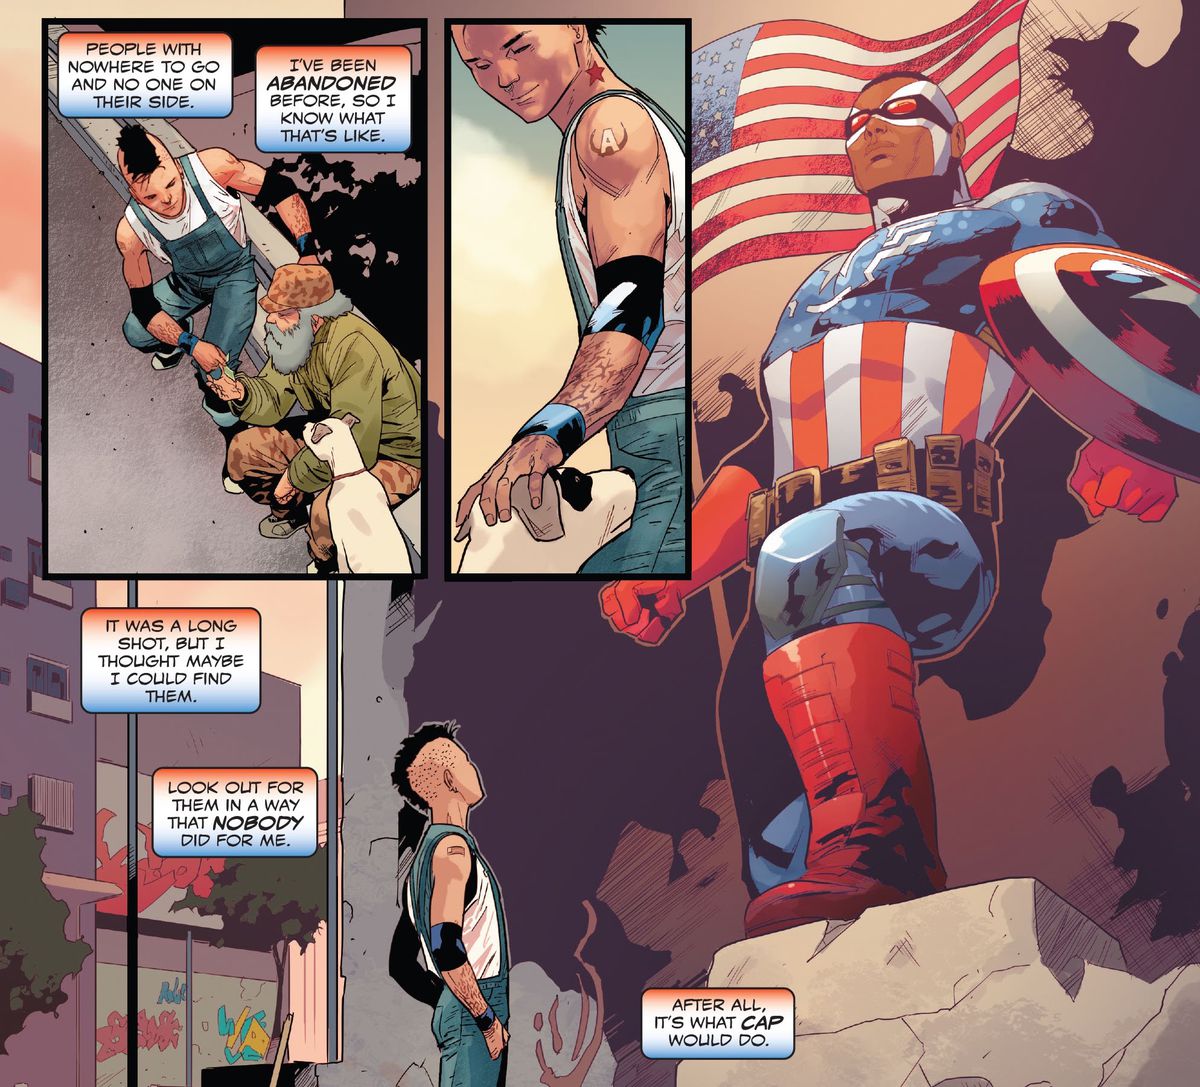 Aaron Fischer muses on how he helps people because it’s what Captain America would do, as he looks up at a mural of Sam Wilson in his Captain America costume in United States of Captain America #1 (2023). 